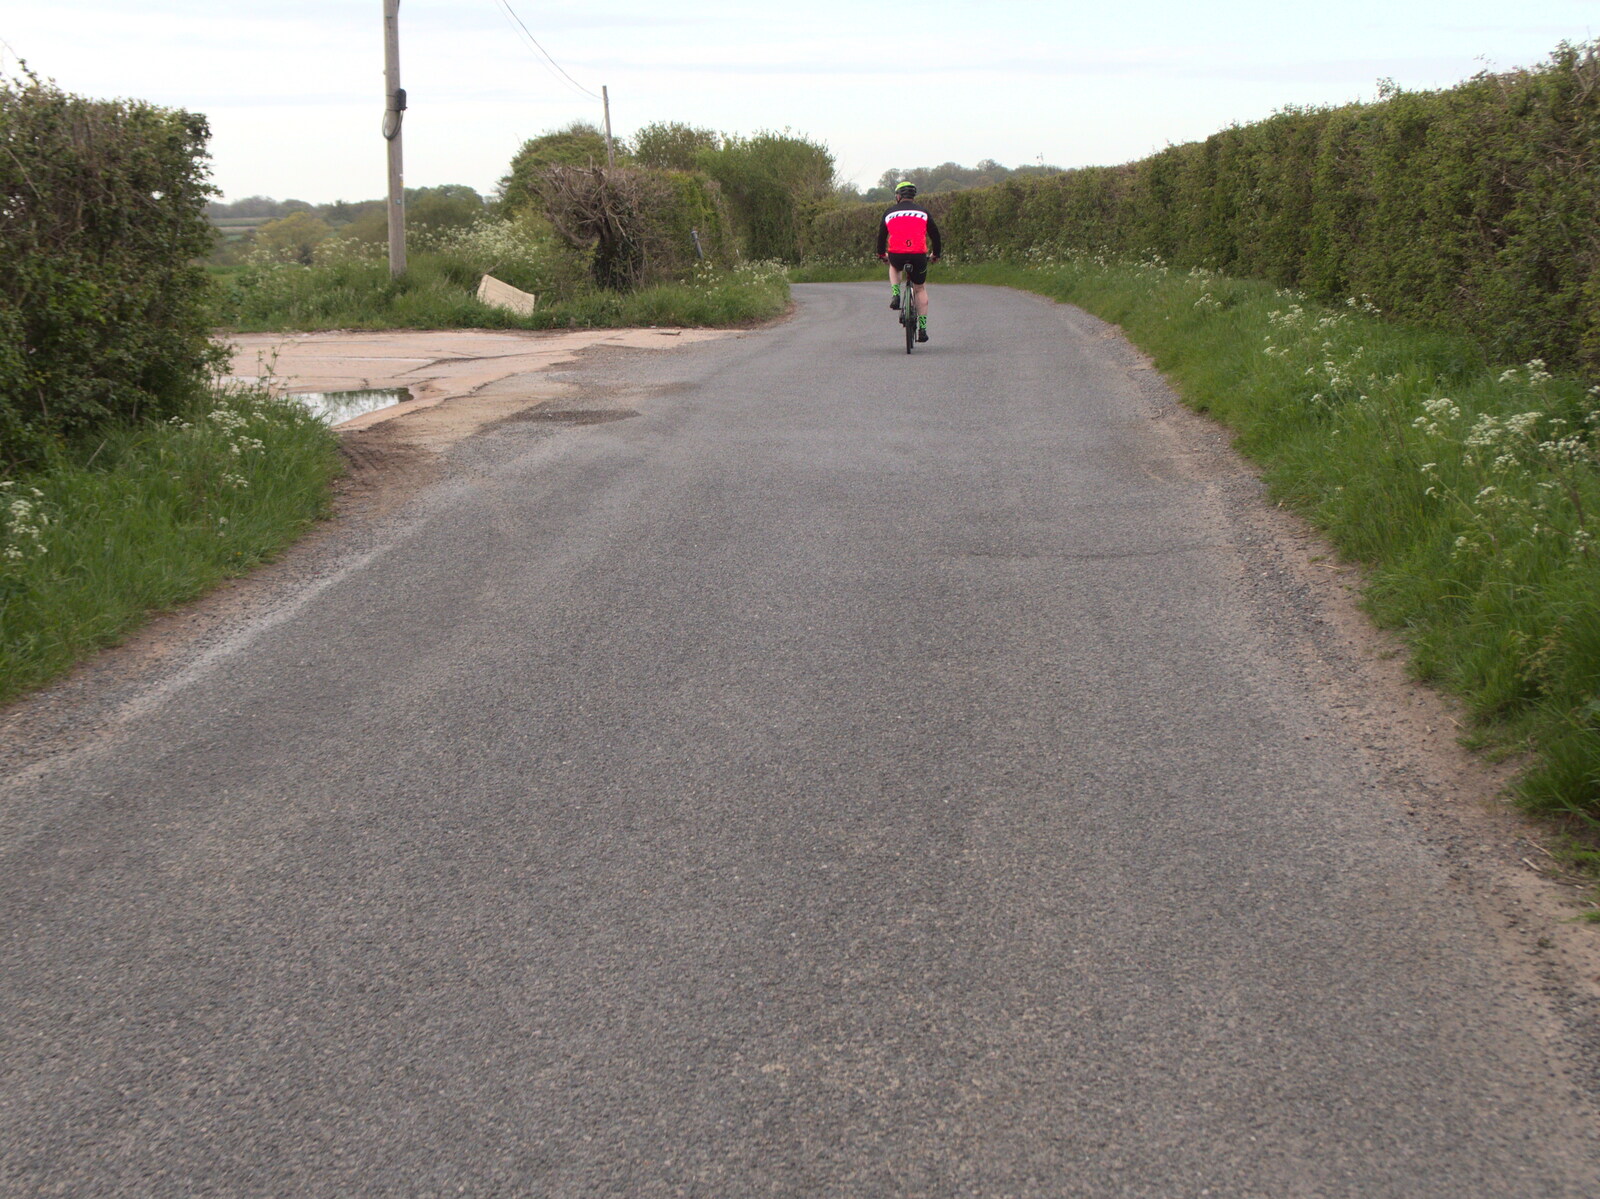 Gaz heads off down Oakley Hill from The BSCC at the King's Head, Brockdish, Norfolk - 13th May 2021